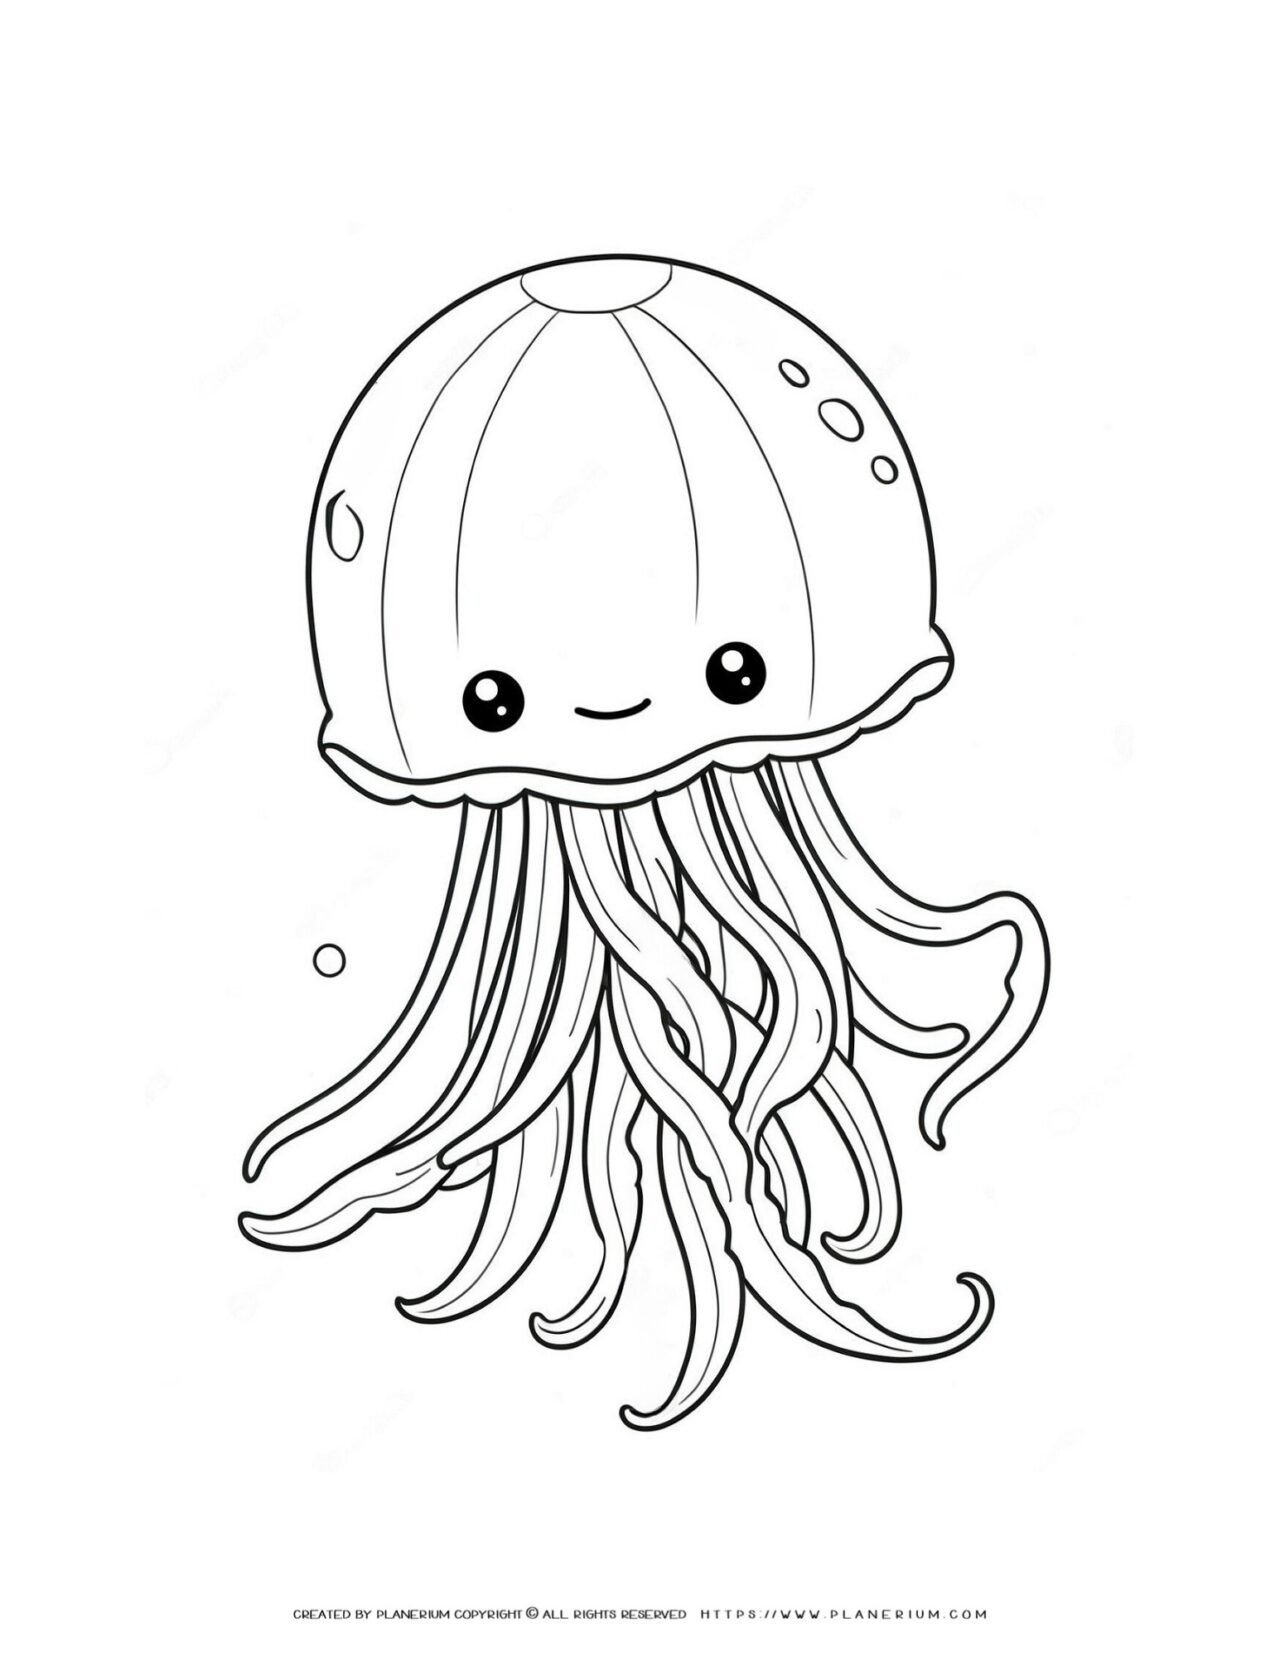 Cute-cartoon-jellyfish-coloring-page